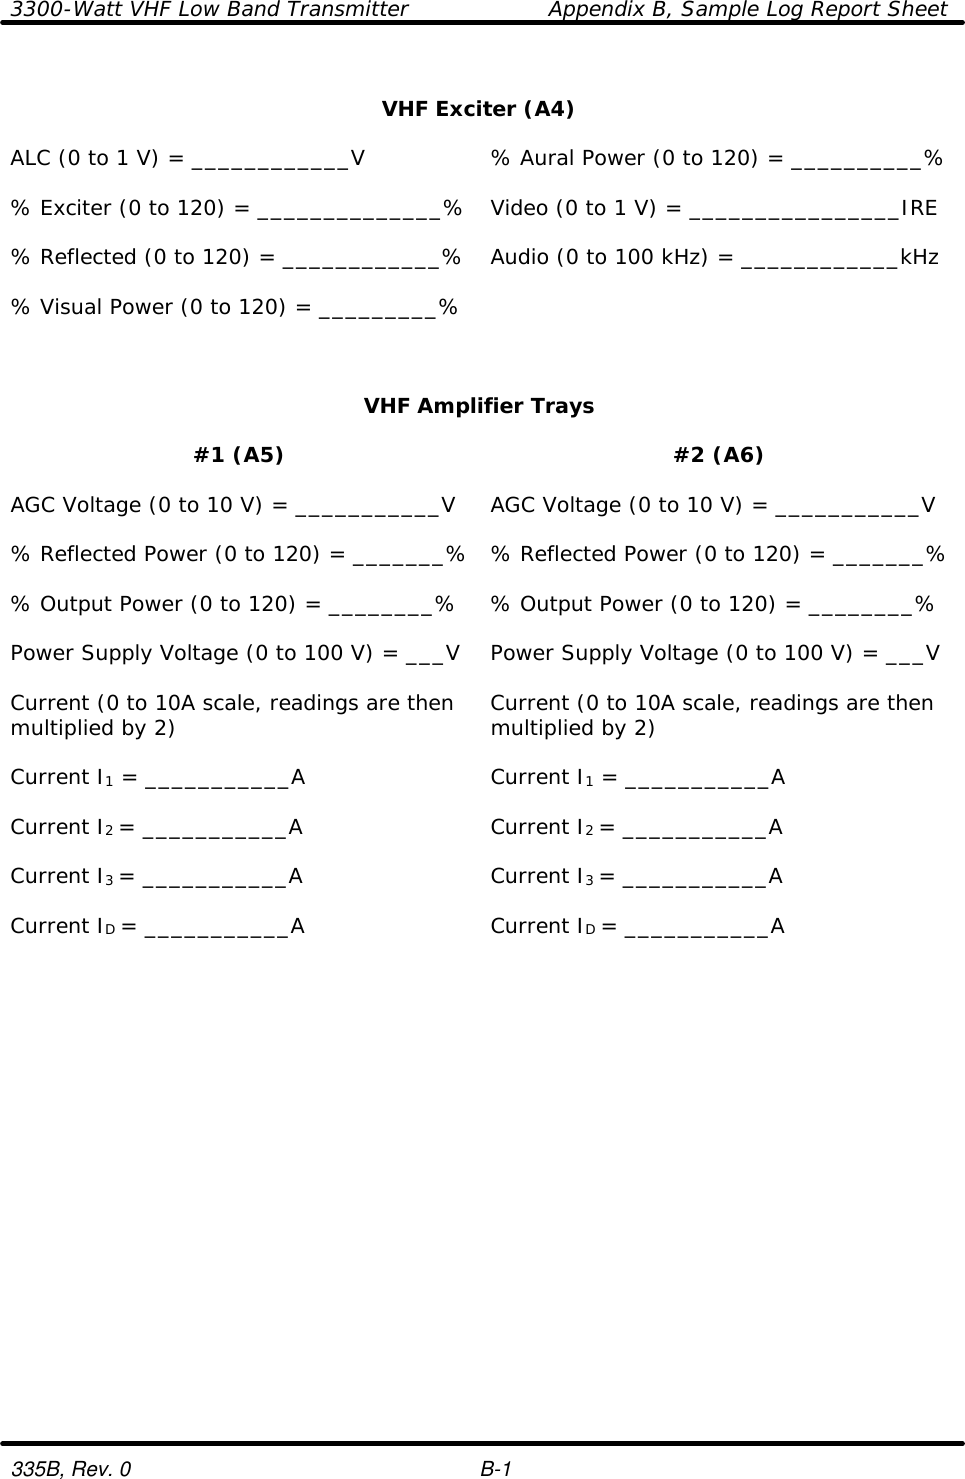 3300-Watt VHF Low Band Transmitter    Appendix B, Sample Log Report Sheet  335B, Rev. 0    B-1  VHF Exciter (A4)    ALC (0 to 1 V) = ____________V % Aural Power (0 to 120) = __________%    % Exciter (0 to 120) = ______________% Video (0 to 1 V) = ________________IRE    % Reflected (0 to 120) = ____________% Audio (0 to 100 kHz) = ____________kHz    % Visual Power (0 to 120) = _________%      VHF Amplifier Trays    #1 (A5) #2 (A6)    AGC Voltage (0 to 10 V) = ___________V AGC Voltage (0 to 10 V) = ___________V    % Reflected Power (0 to 120) = _______% % Reflected Power (0 to 120) = _______%    % Output Power (0 to 120) = ________% % Output Power (0 to 120) = ________%    Power Supply Voltage (0 to 100 V) = ___V Power Supply Voltage (0 to 100 V) = ___V    Current (0 to 10A scale, readings are then multiplied by 2) Current (0 to 10A scale, readings are then multiplied by 2)    Current I1 = ___________A Current I1 = ___________A    Current I2 = ___________A Current I2 = ___________A    Current I3 = ___________A Current I3 = ___________A    Current ID = ___________A Current ID = ___________A     